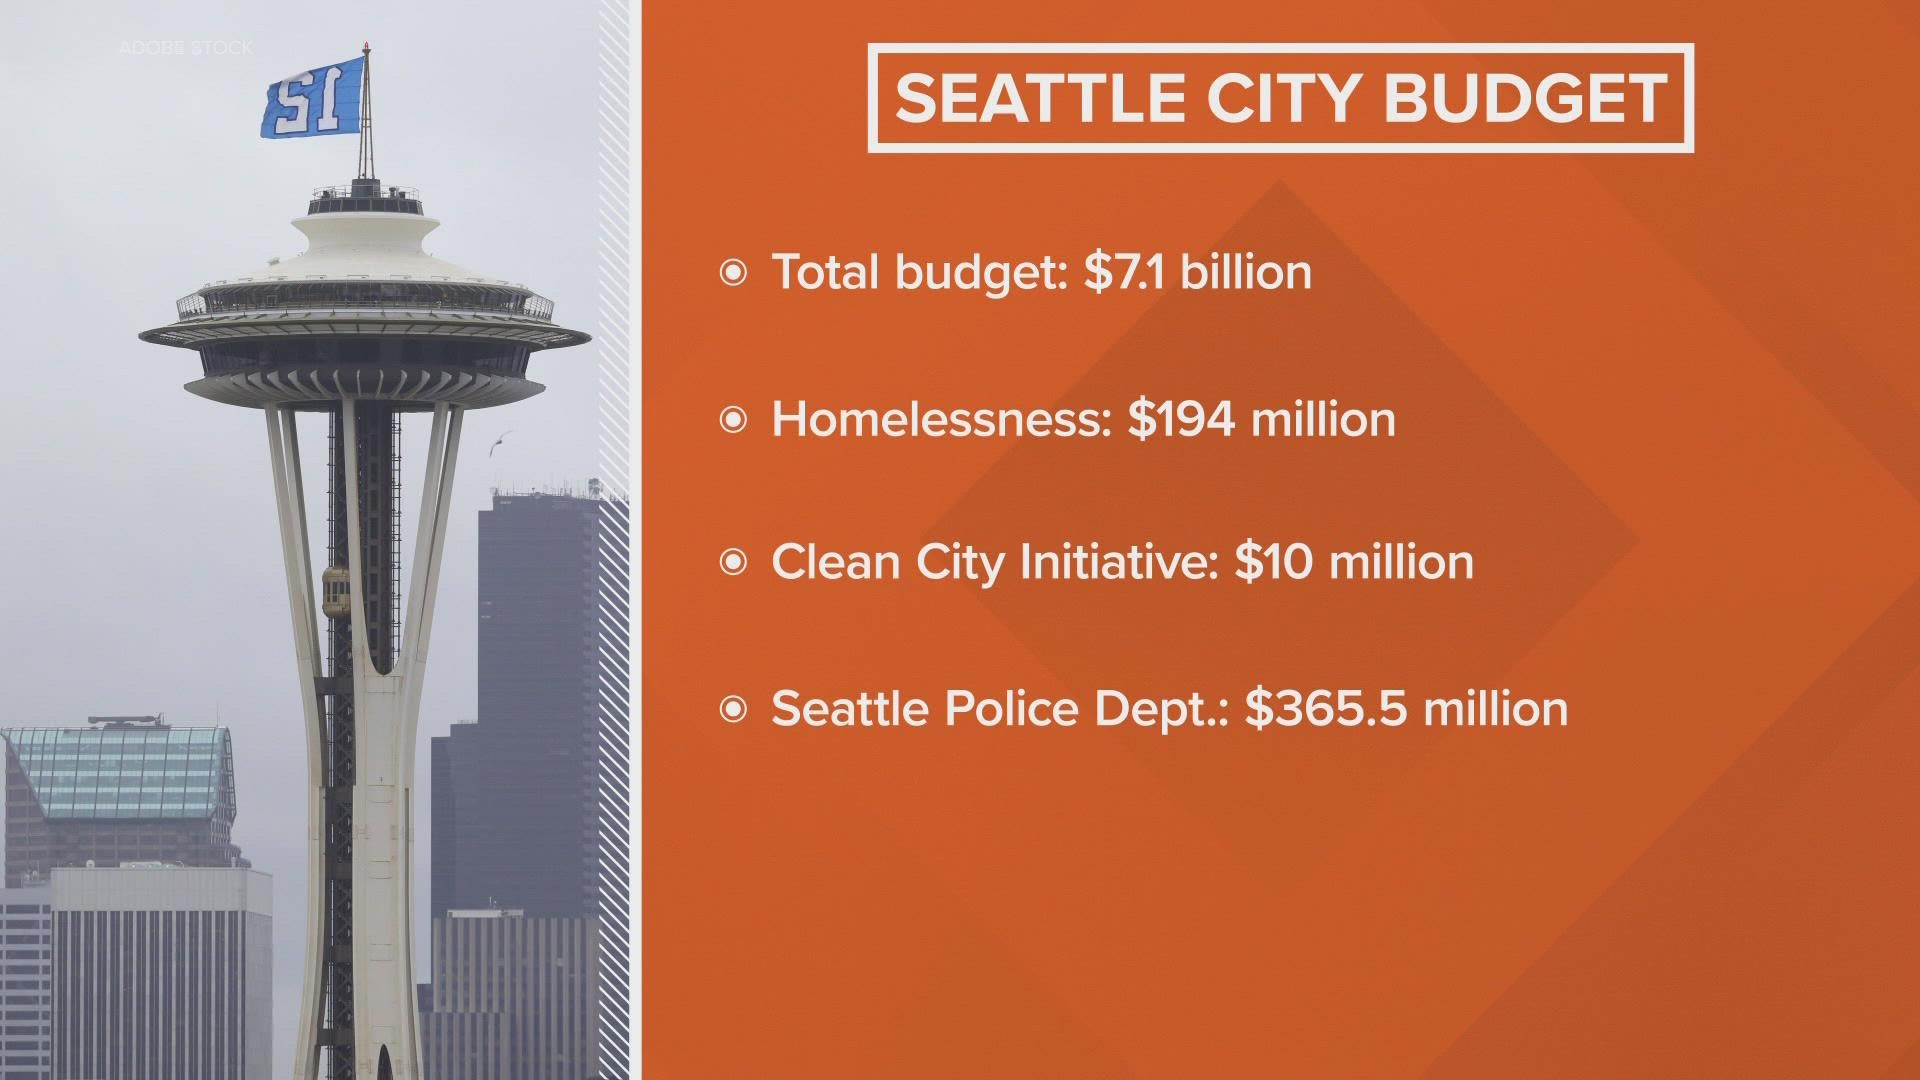 The budget invests nearly $200 million in affordable housing and fully funds the police department's hiring plan